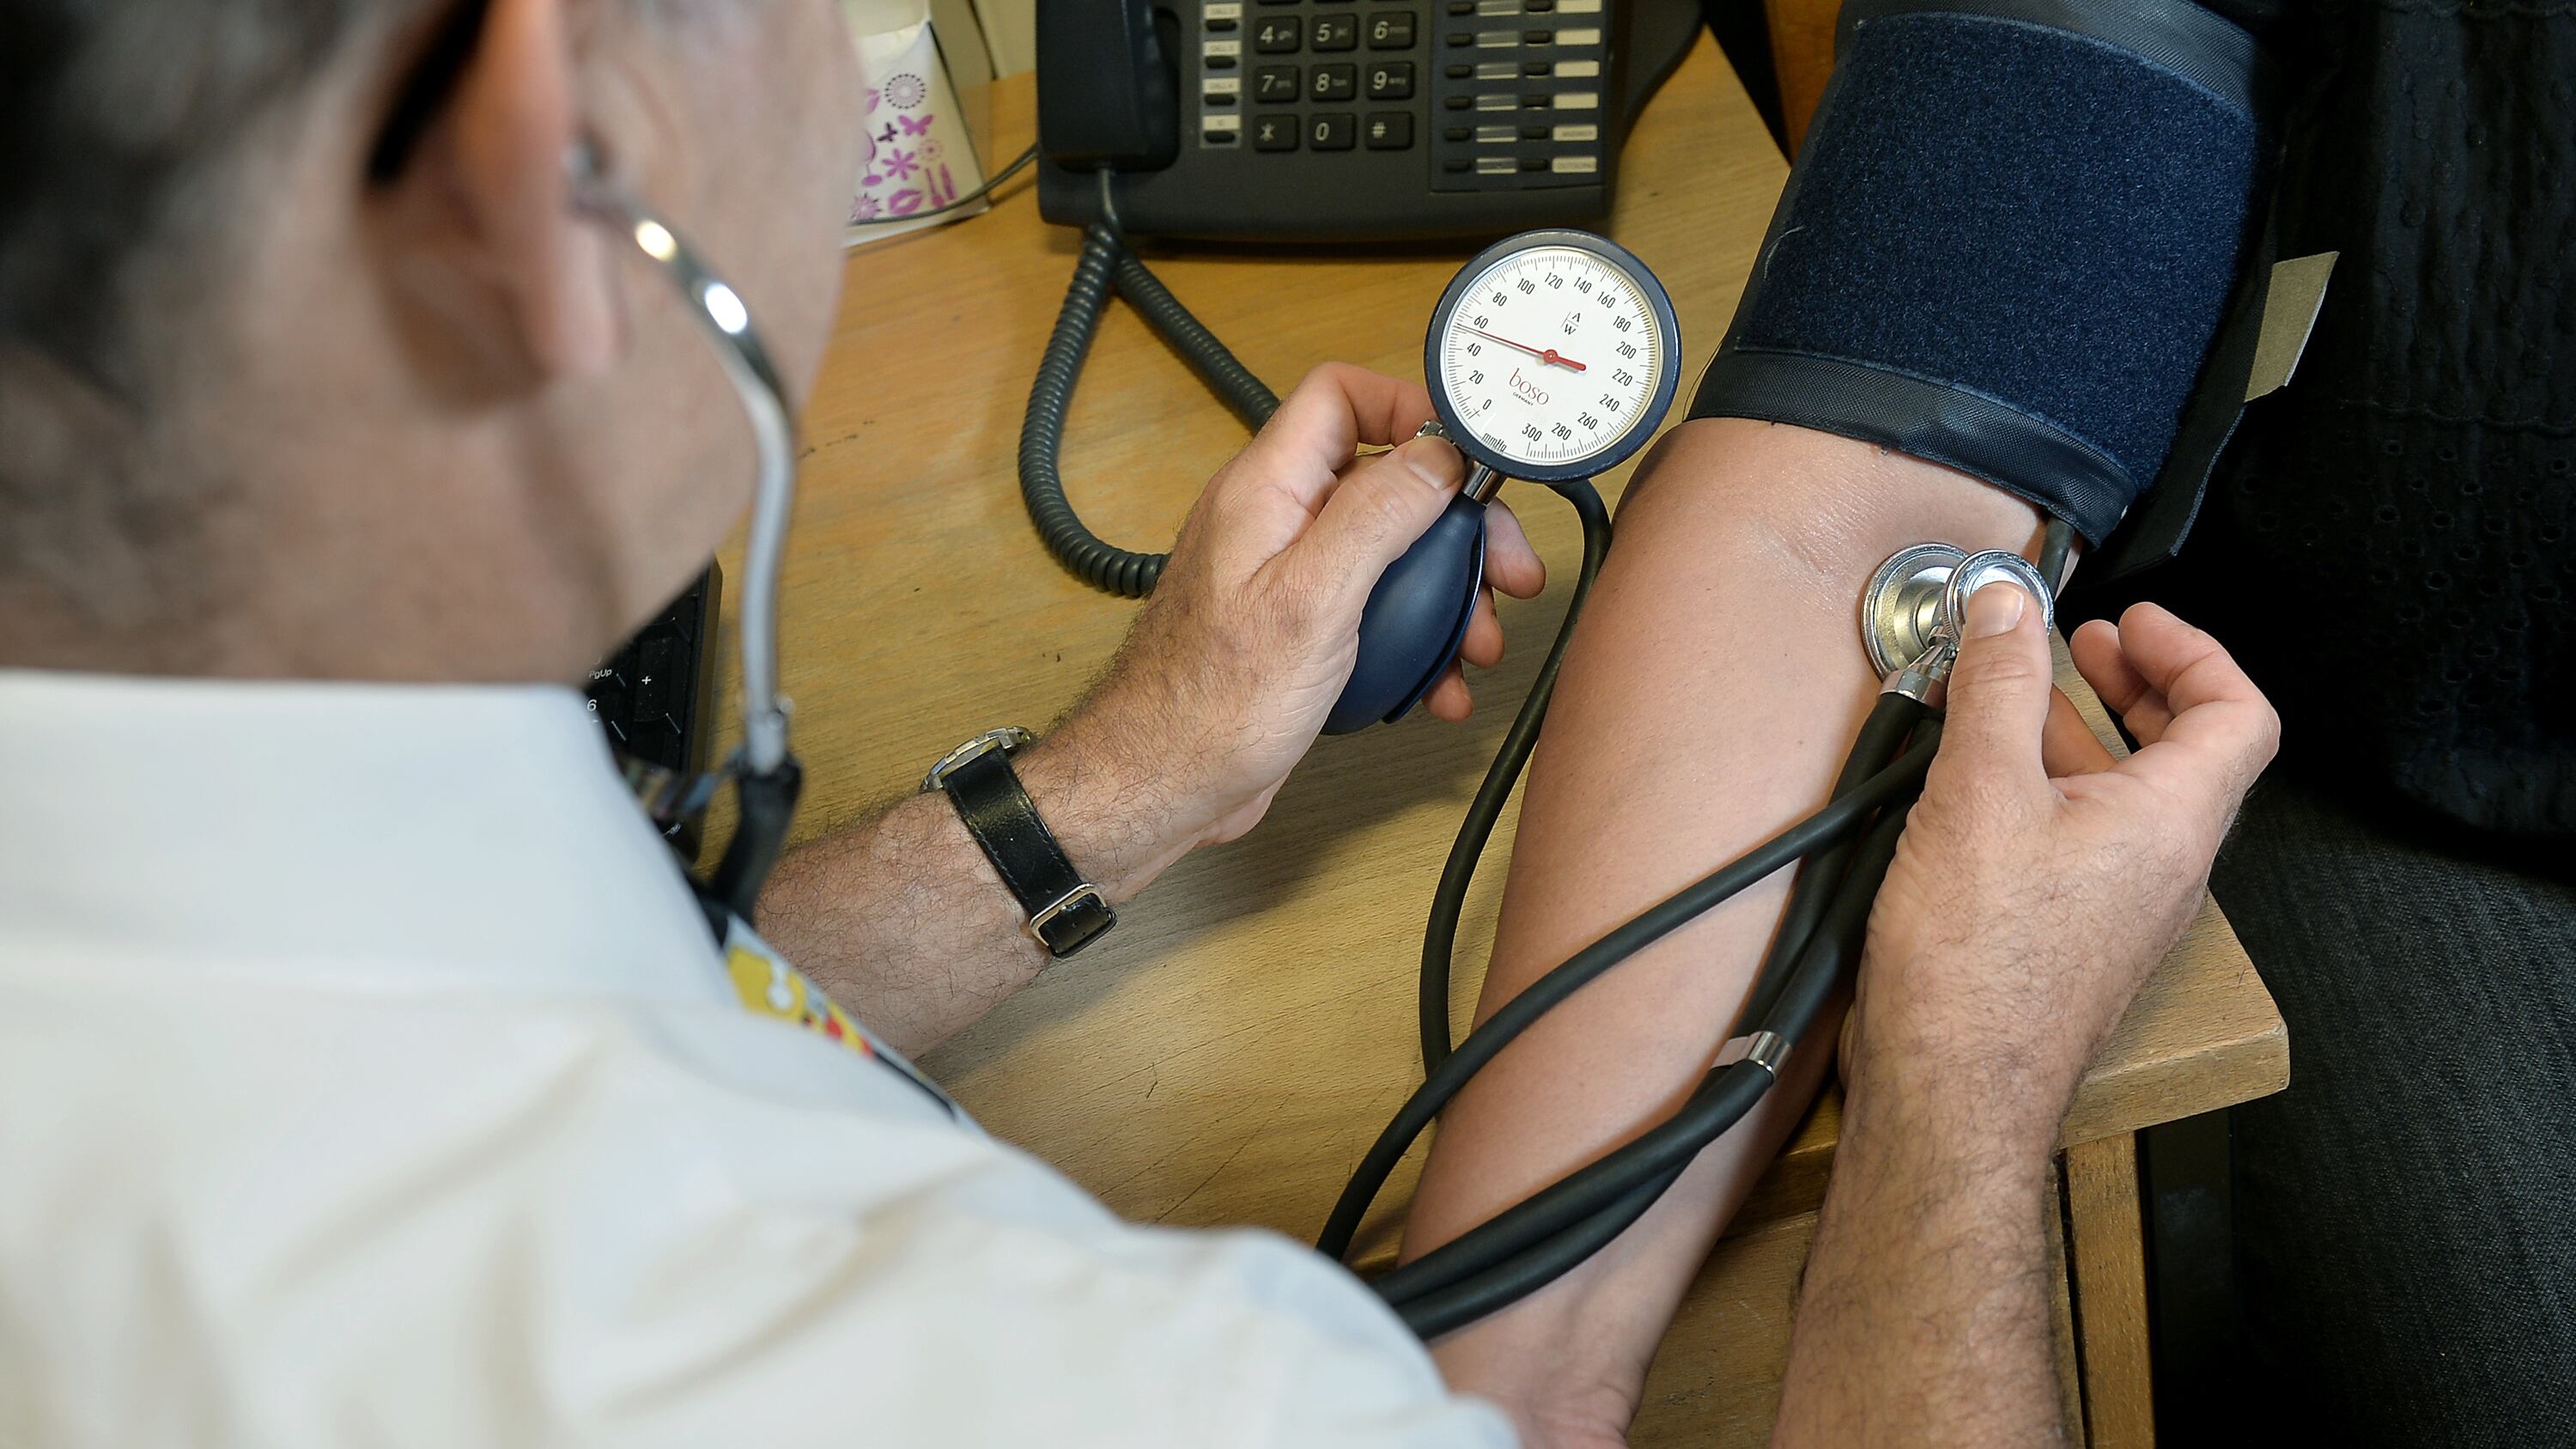 Information collected as part of routine health checks could be used to estimate a patient’s risk of developing a number of diseases over 10 years